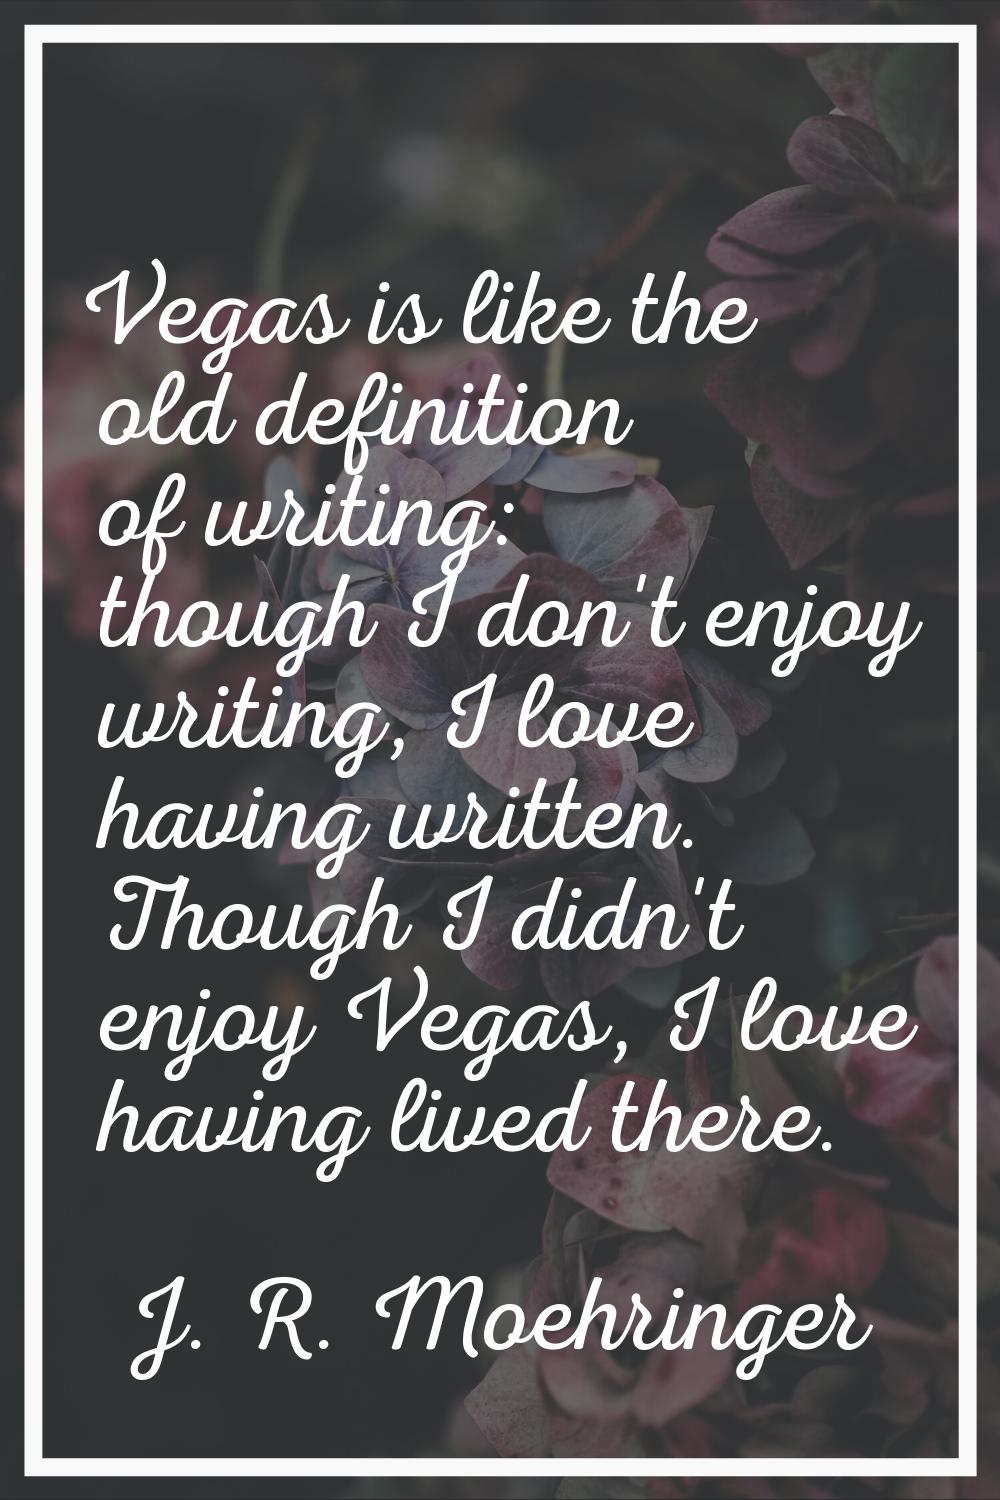 Vegas is like the old definition of writing: though I don't enjoy writing, I love having written. T